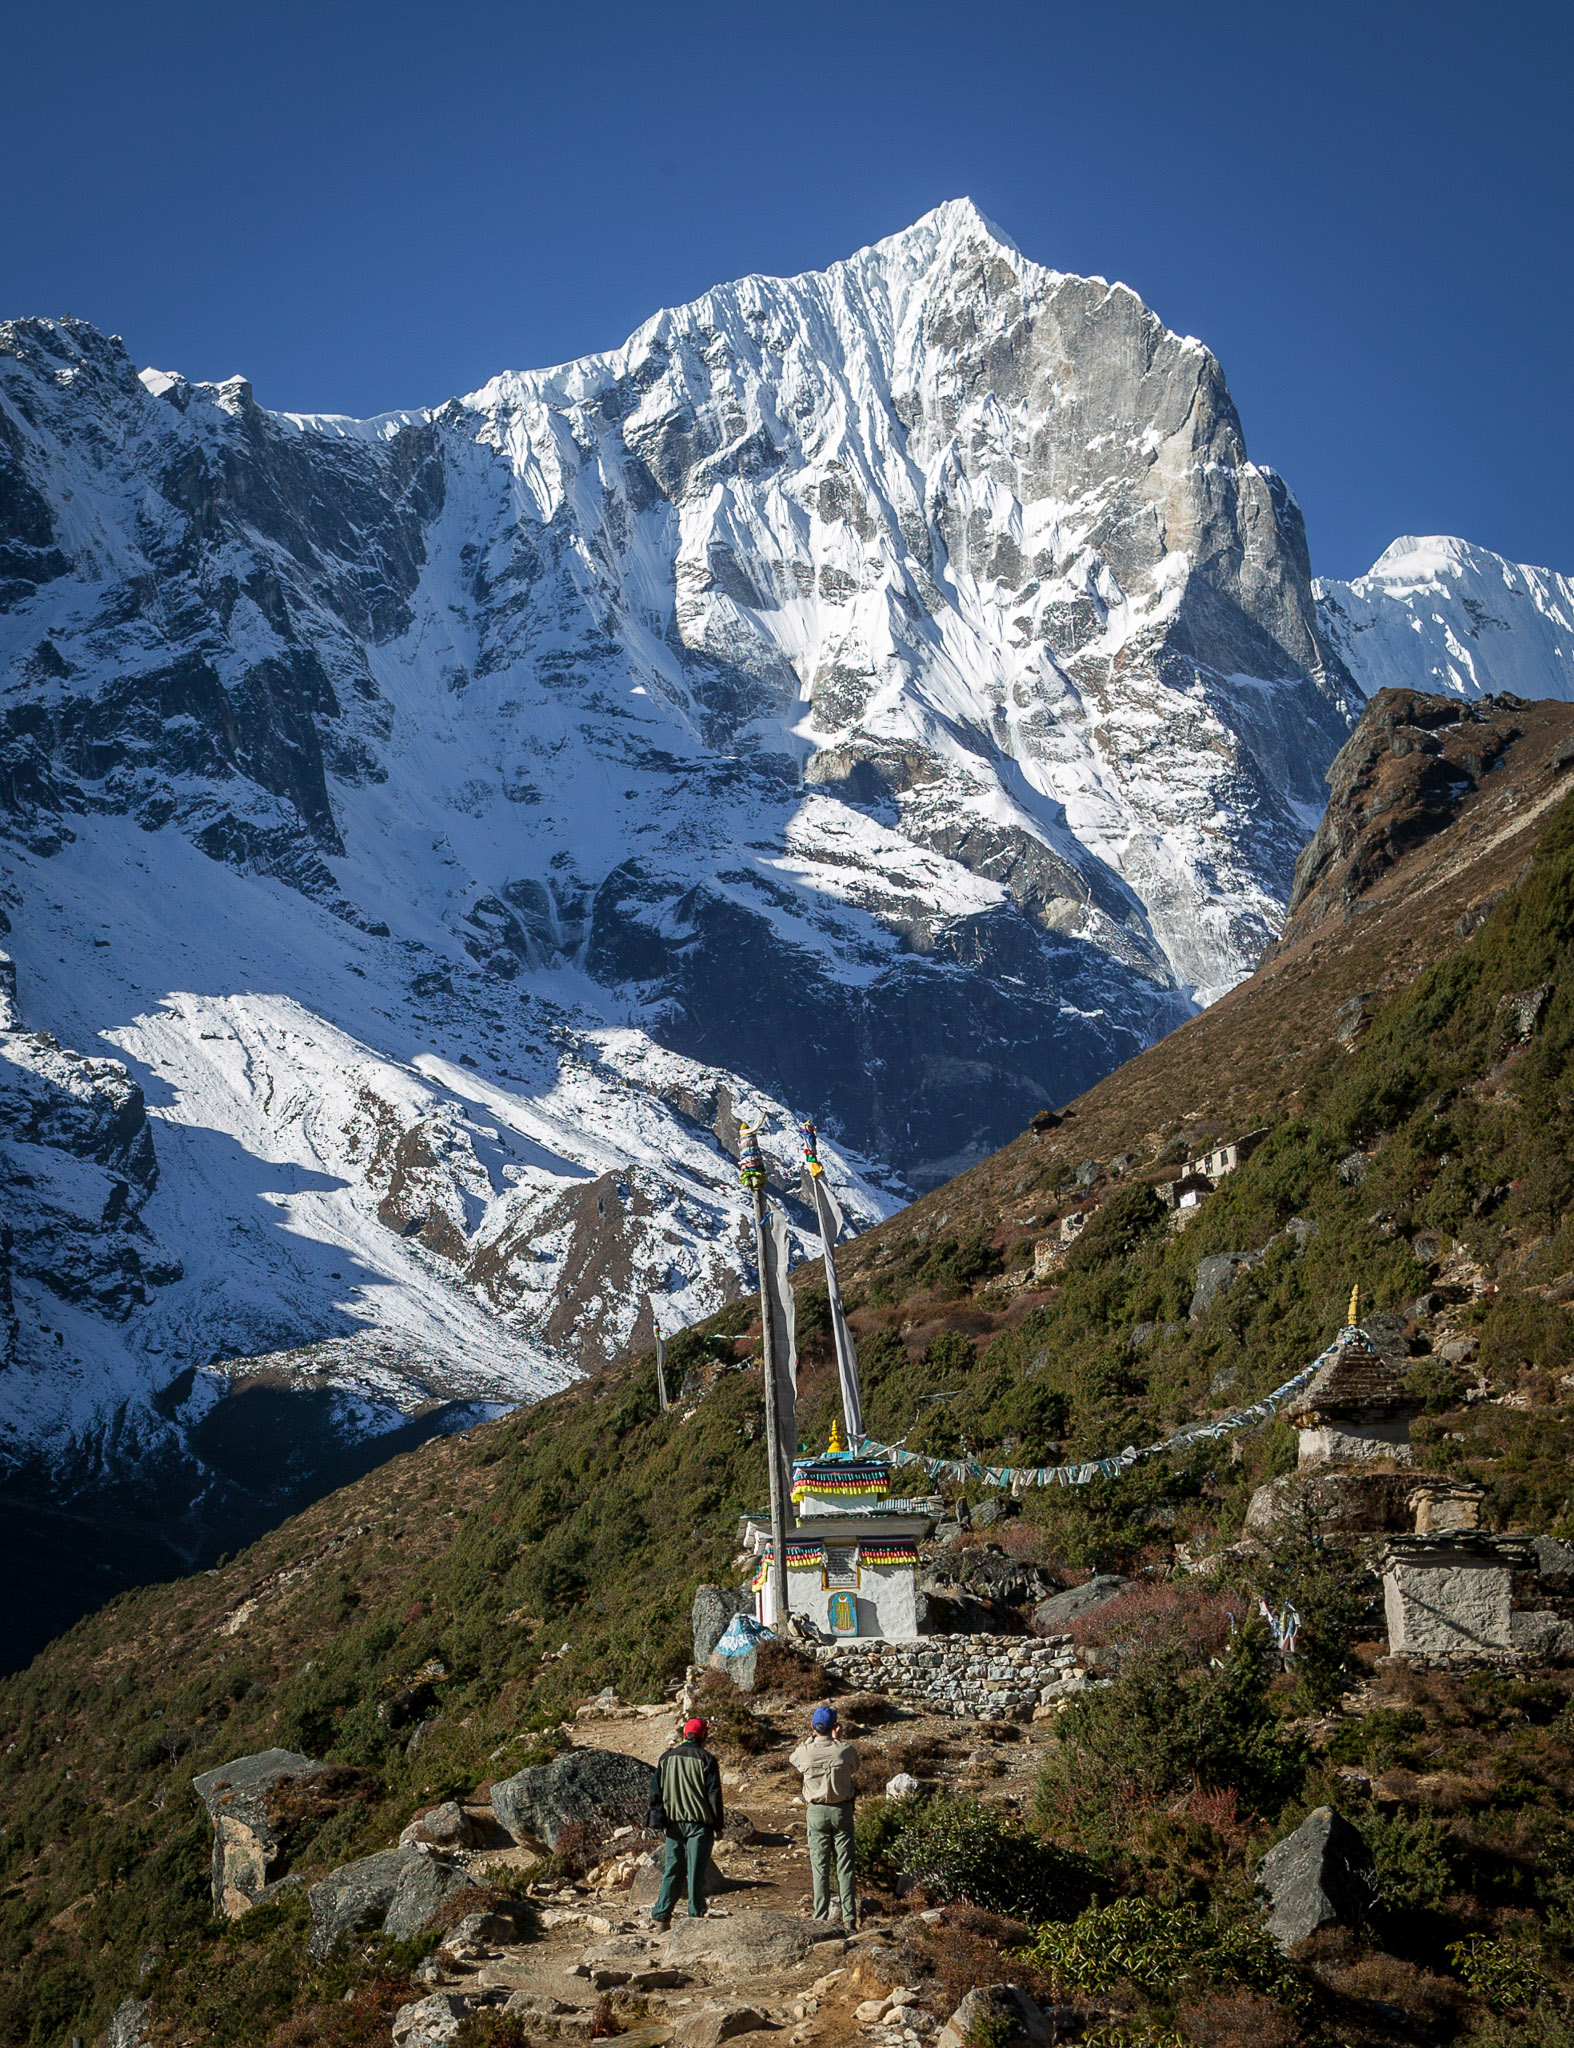 Hiking up to the Thame Dechen Chokhorling Monastery